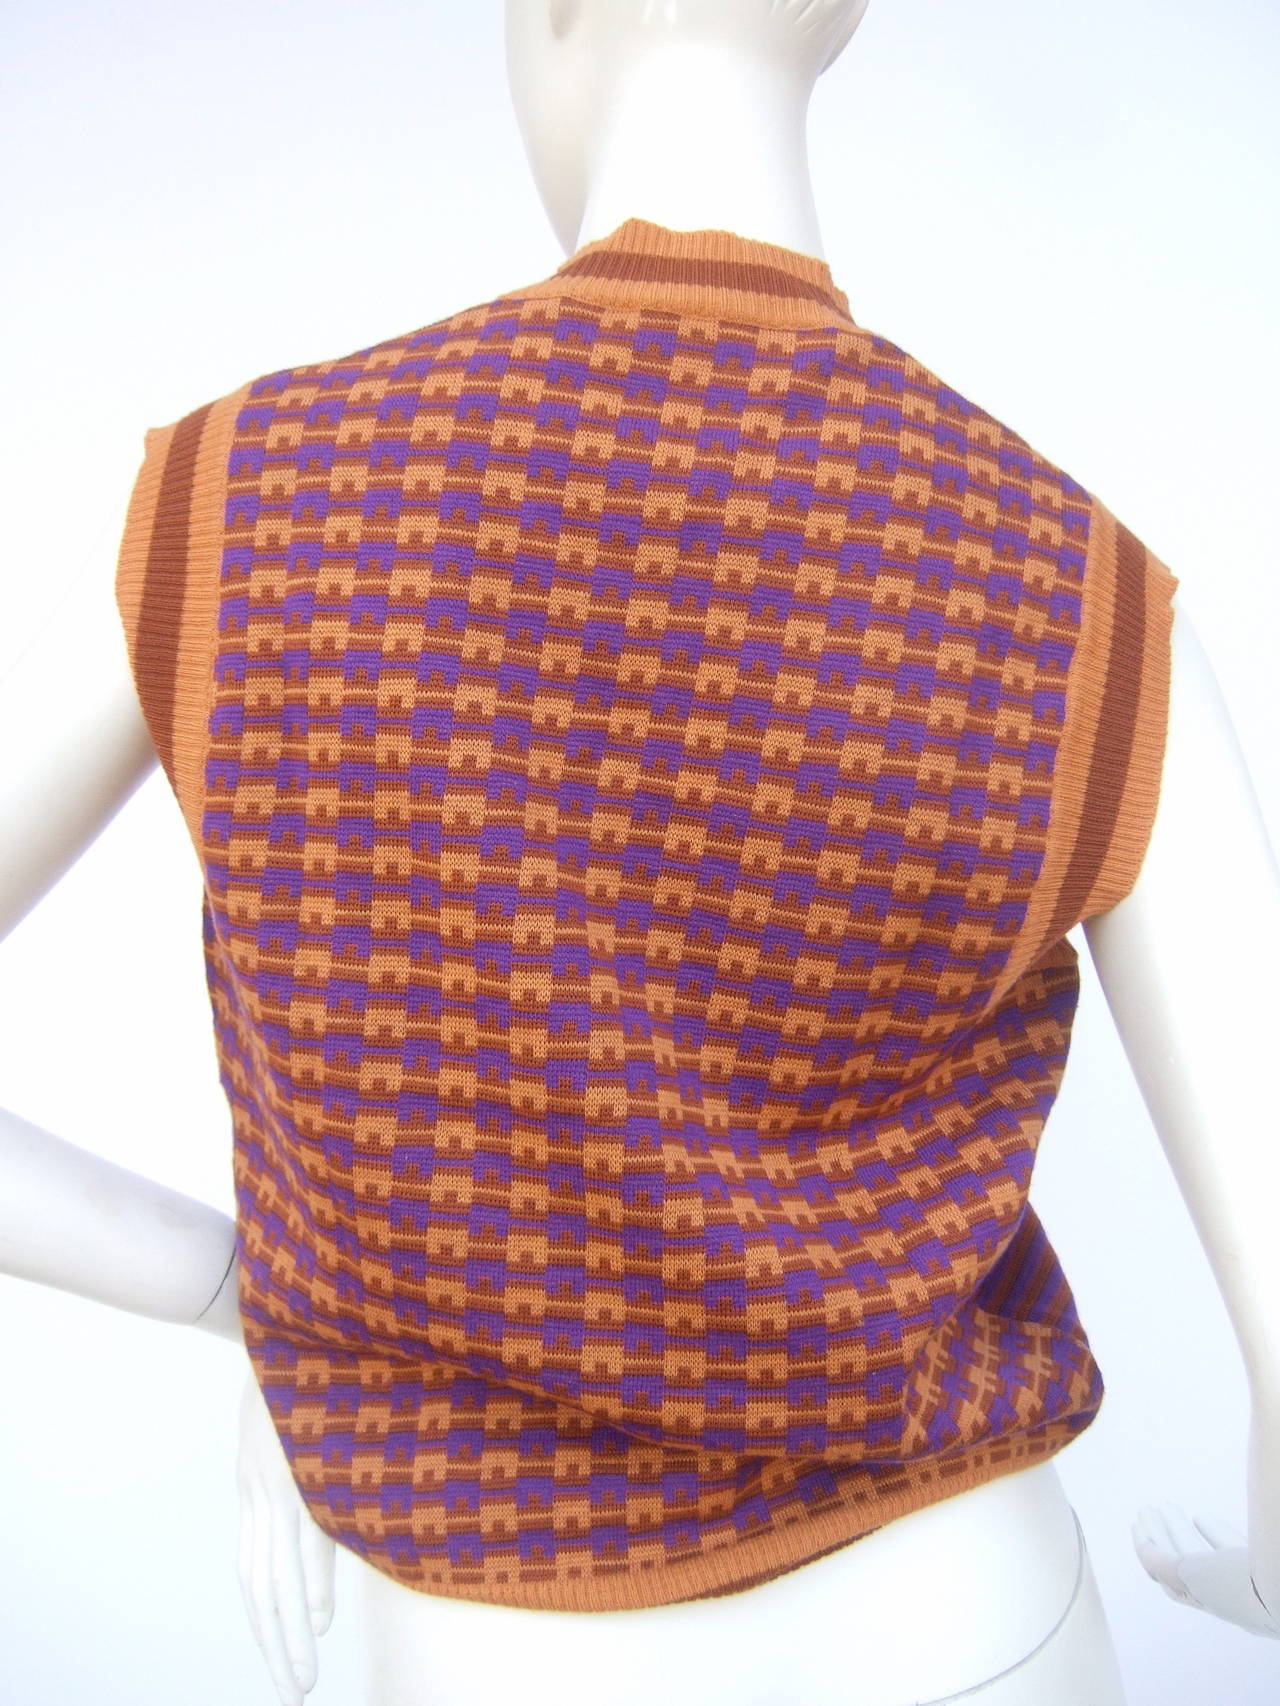 Gucci Italy Equestrian Design Wool Knit Sweater Vest c 1970 3